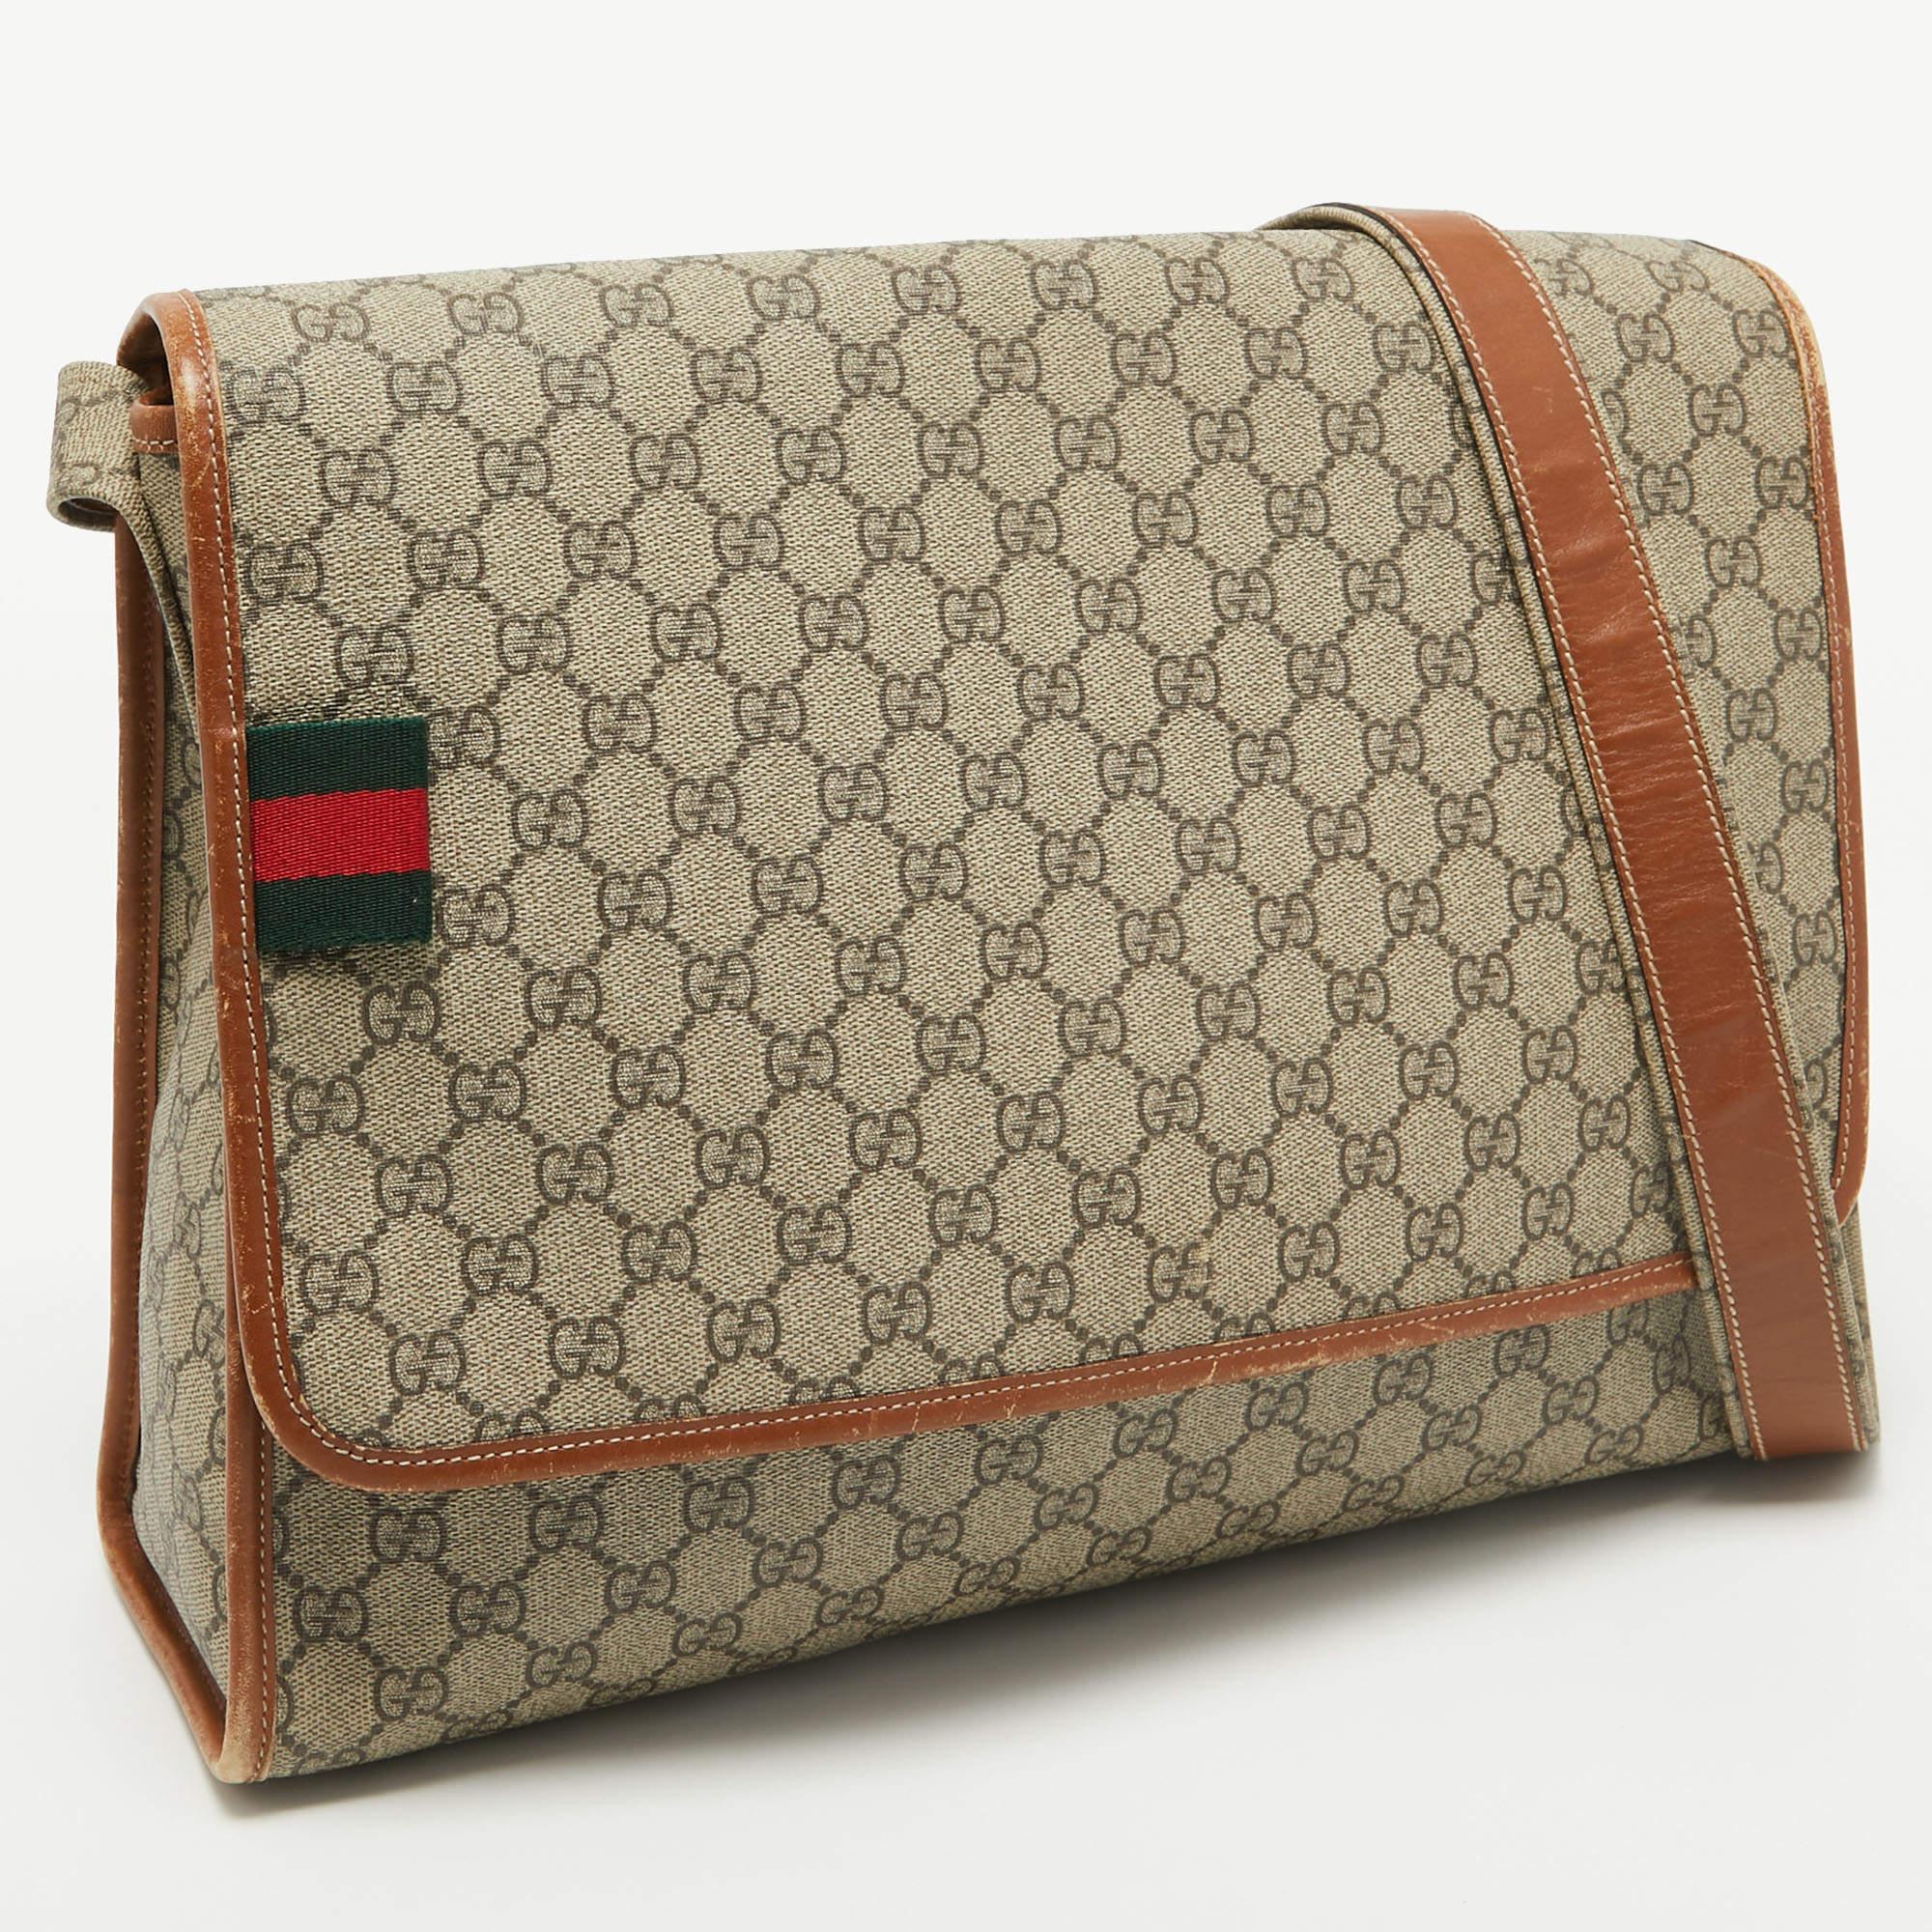 Gucci Beige/Brown GG Supreme Canvas And Leather Messenger Bag For Sale 26